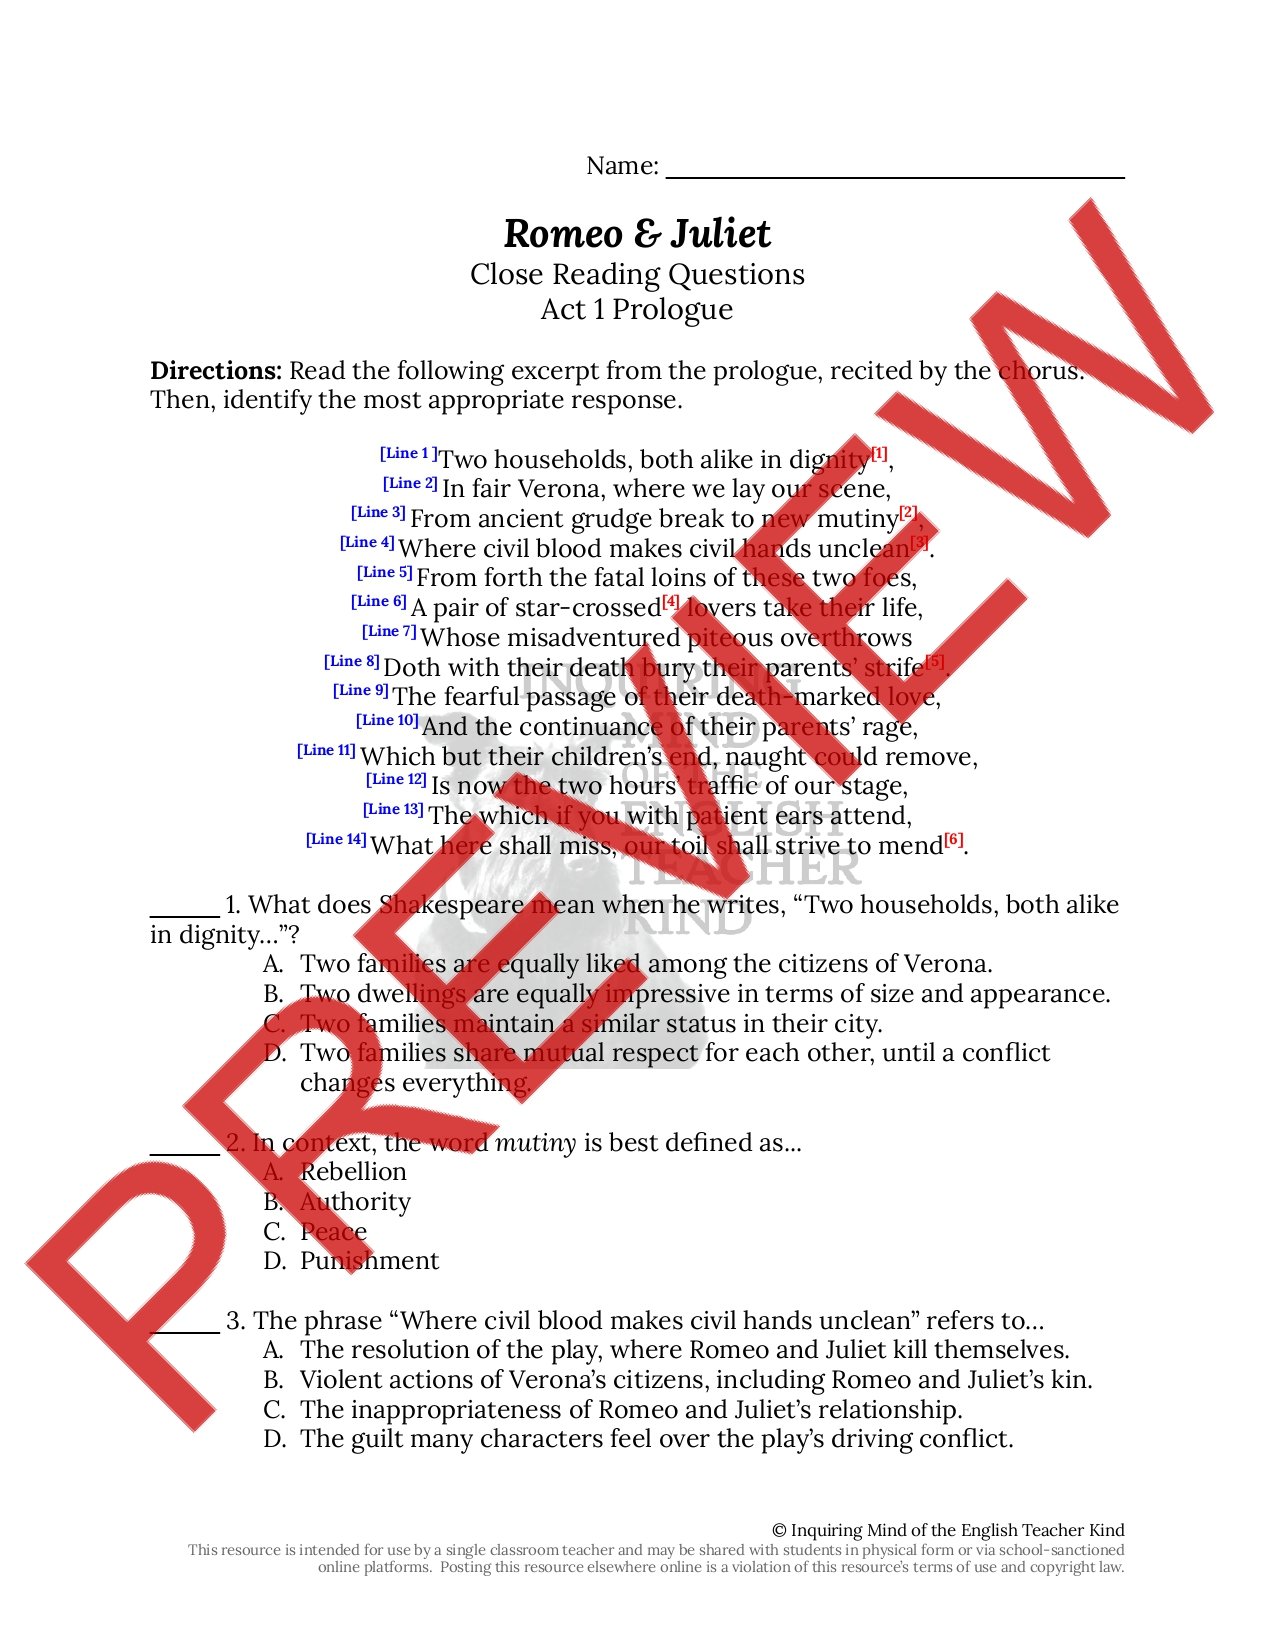 romeo-and-juliet-act-1-prologue-close-reading-worksheet-and-answer-key-inquiring-mind-of-the